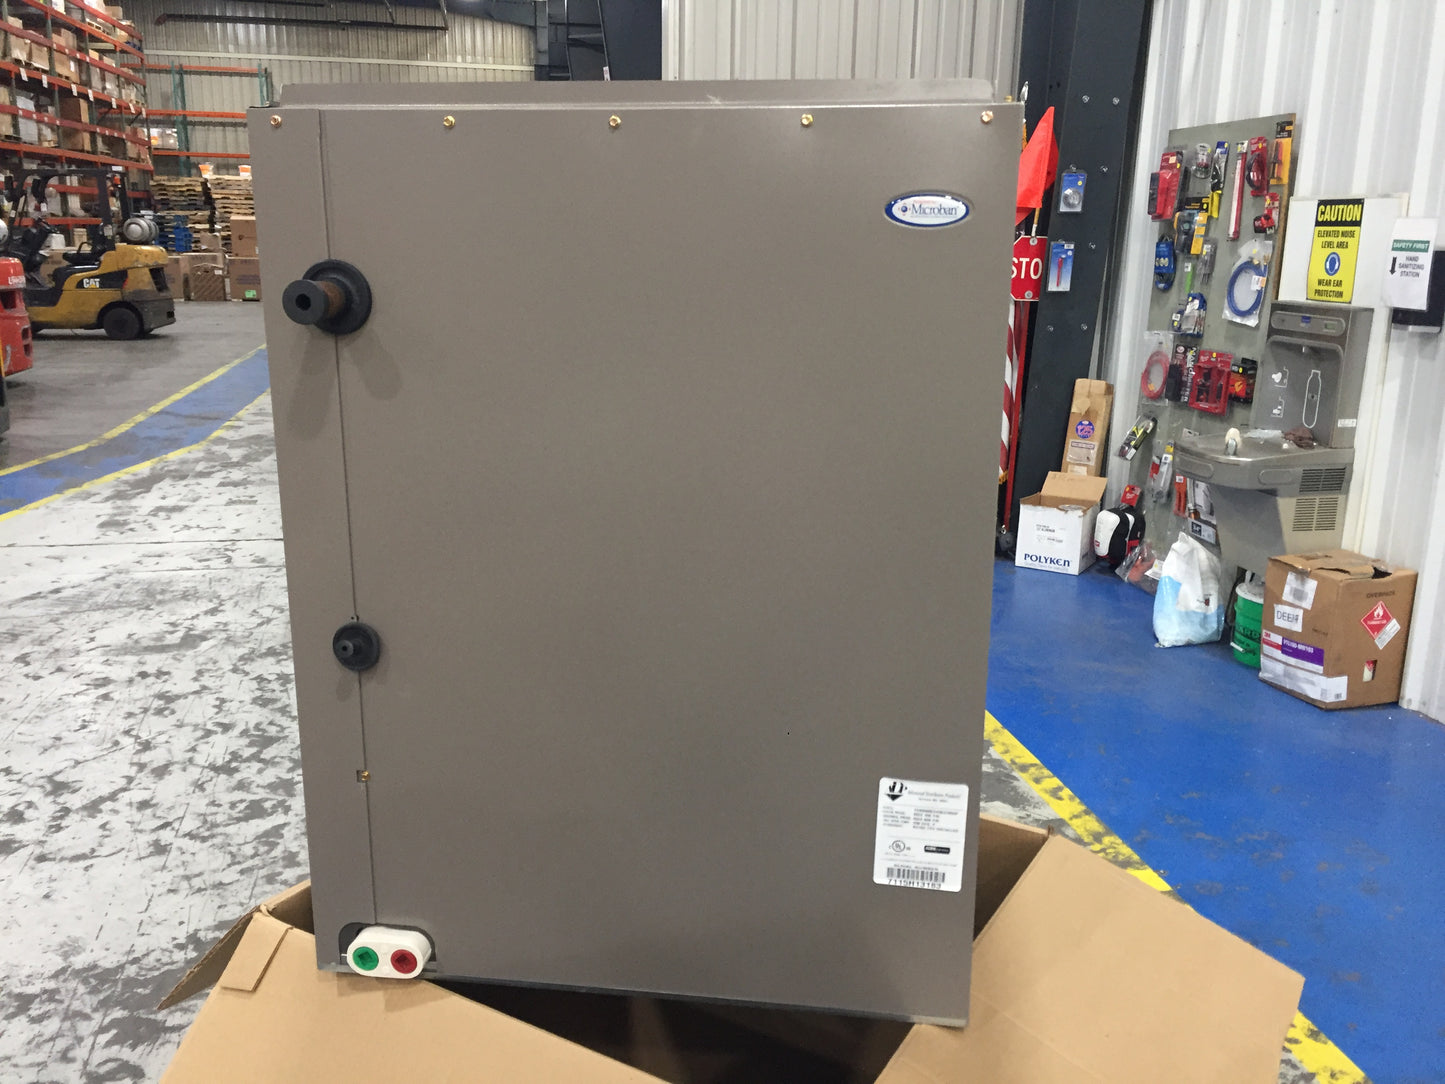 5 TON AC/HP UPFLOW/DOWNFLOW CASED "A" COIL R-410A